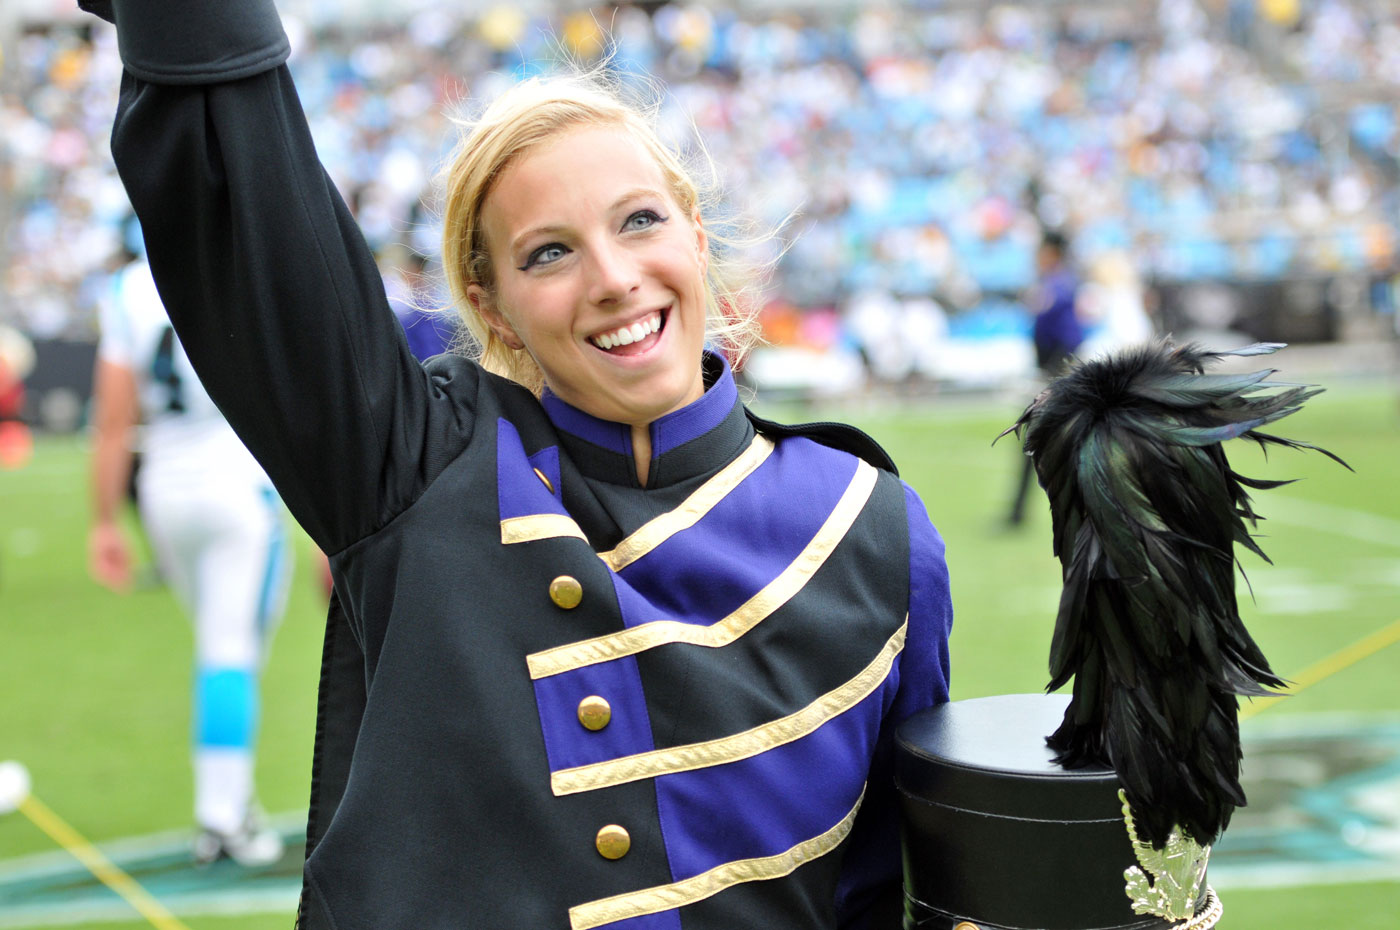 Female Marching Band Member